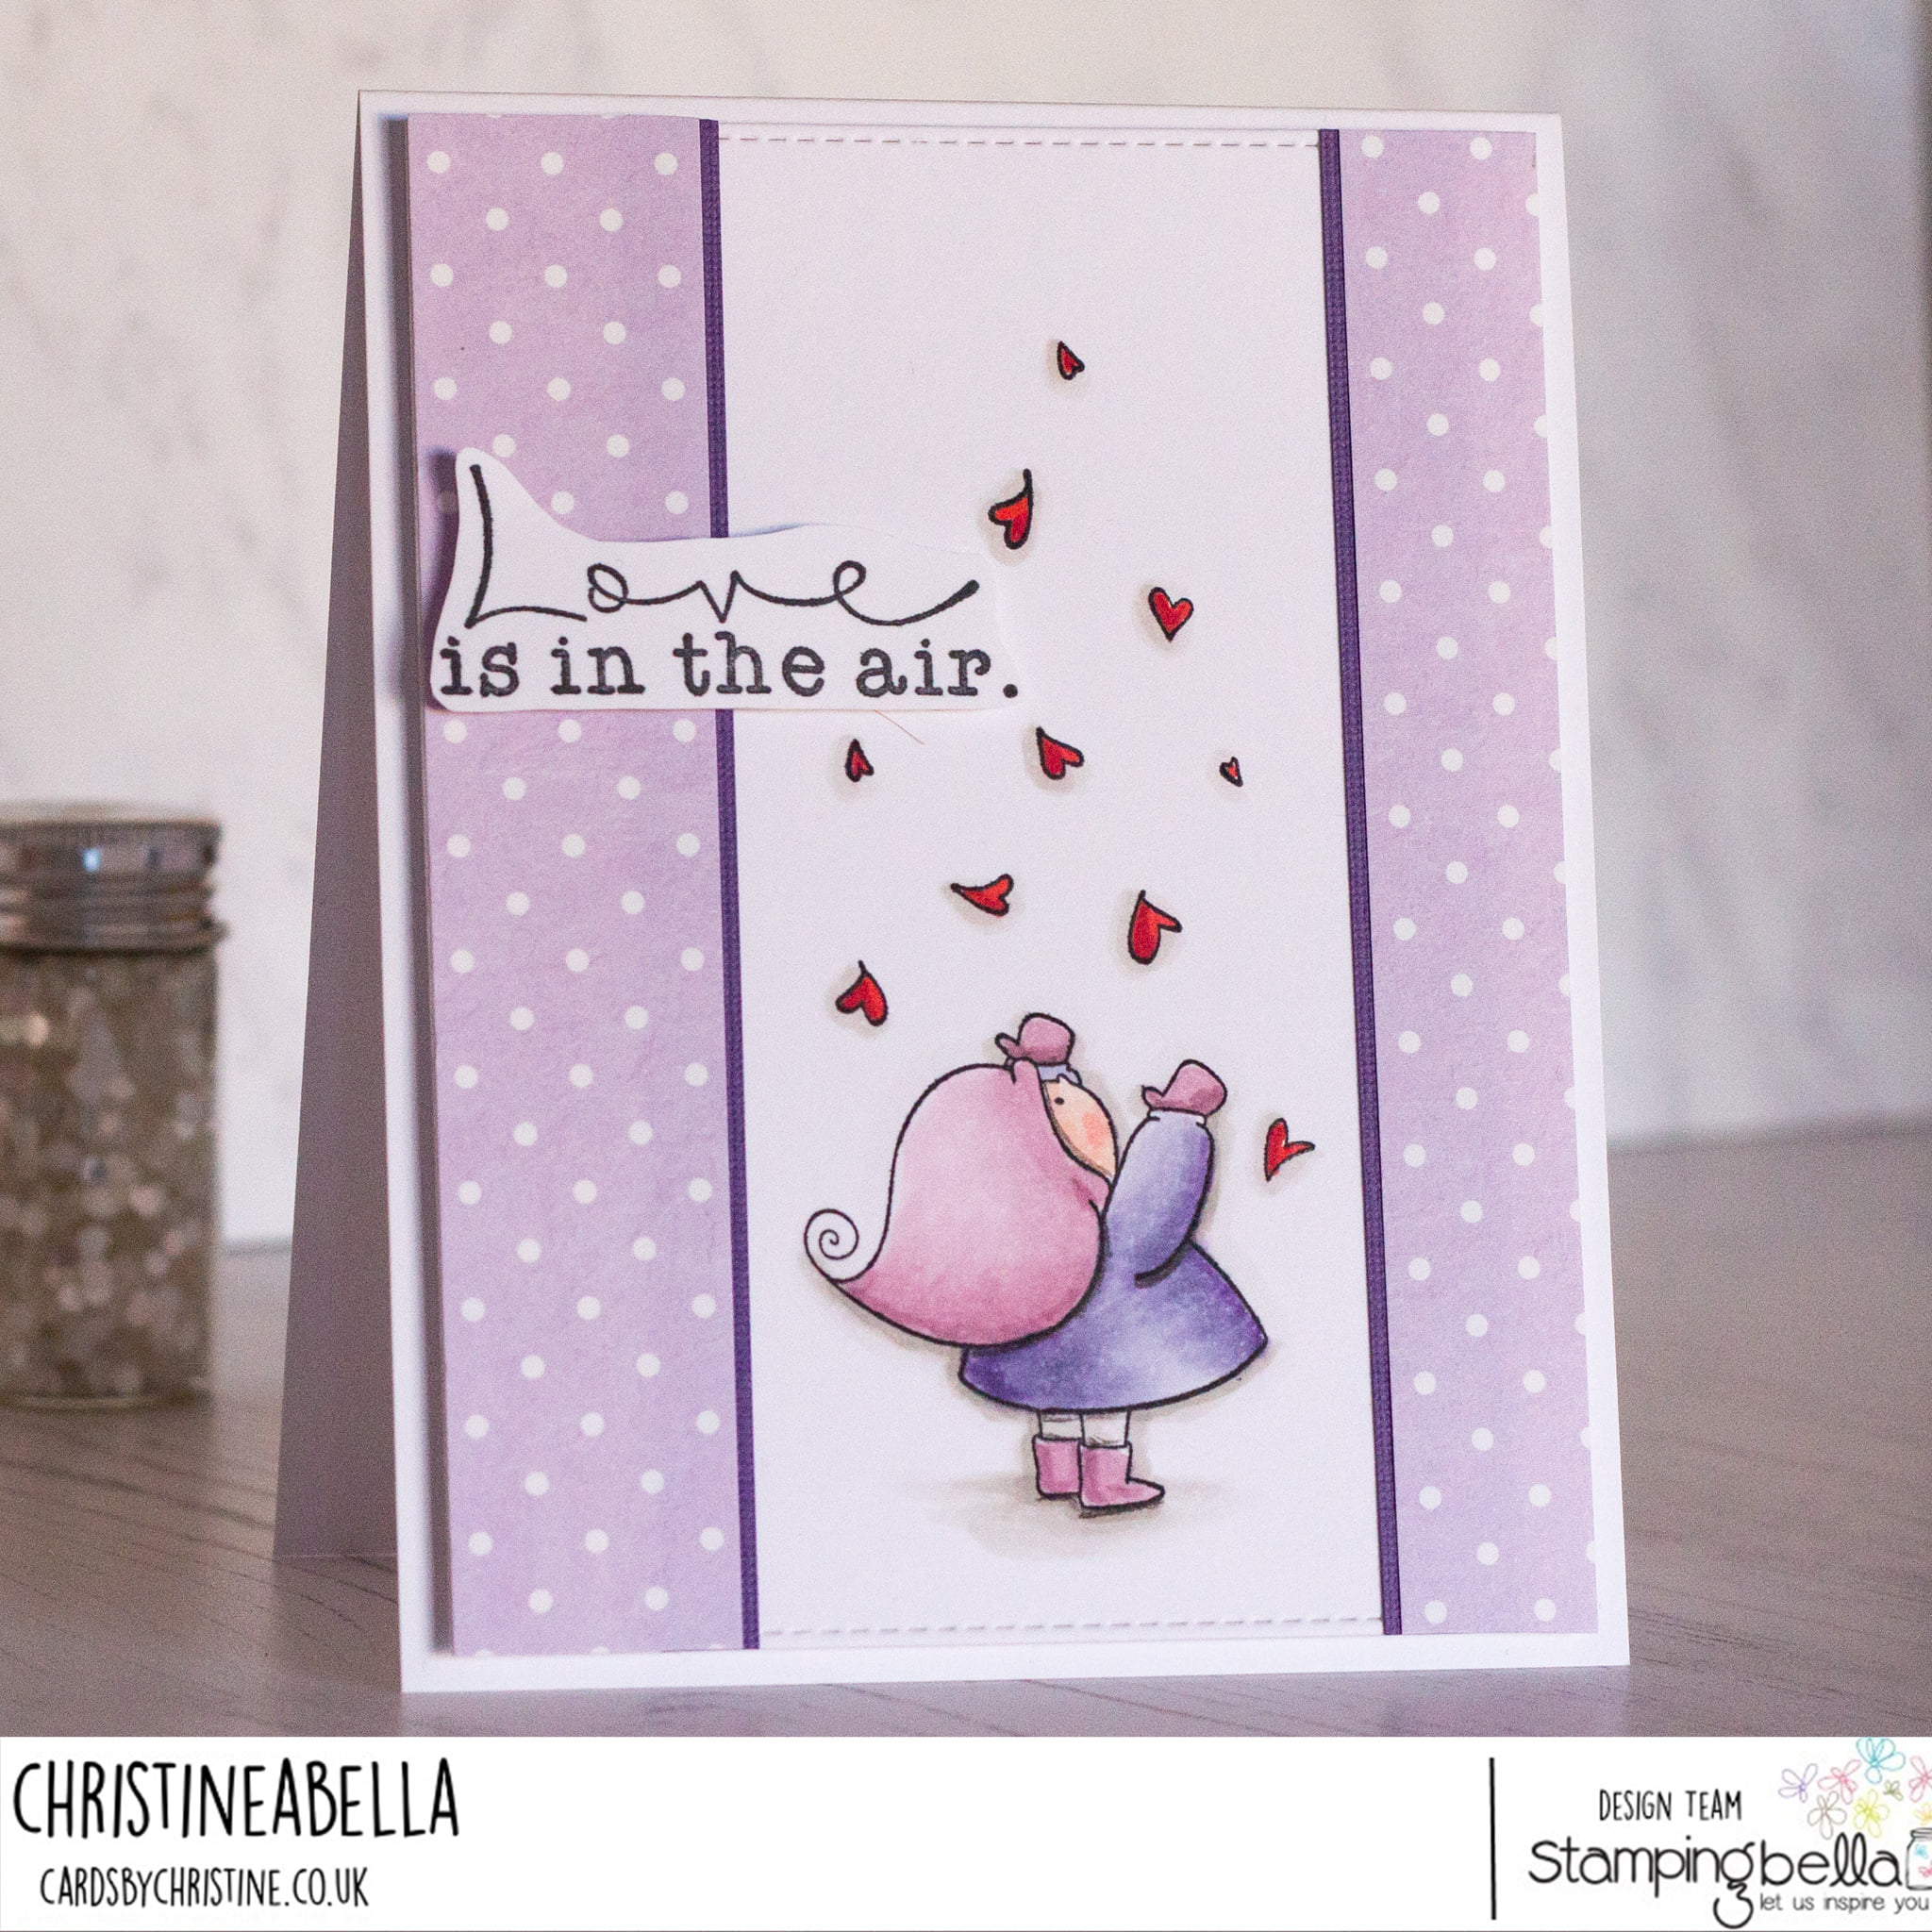  www.stampingbella.com: rubber stamp used: Bundle Girl with falling heartsl. Card by Christine Levison